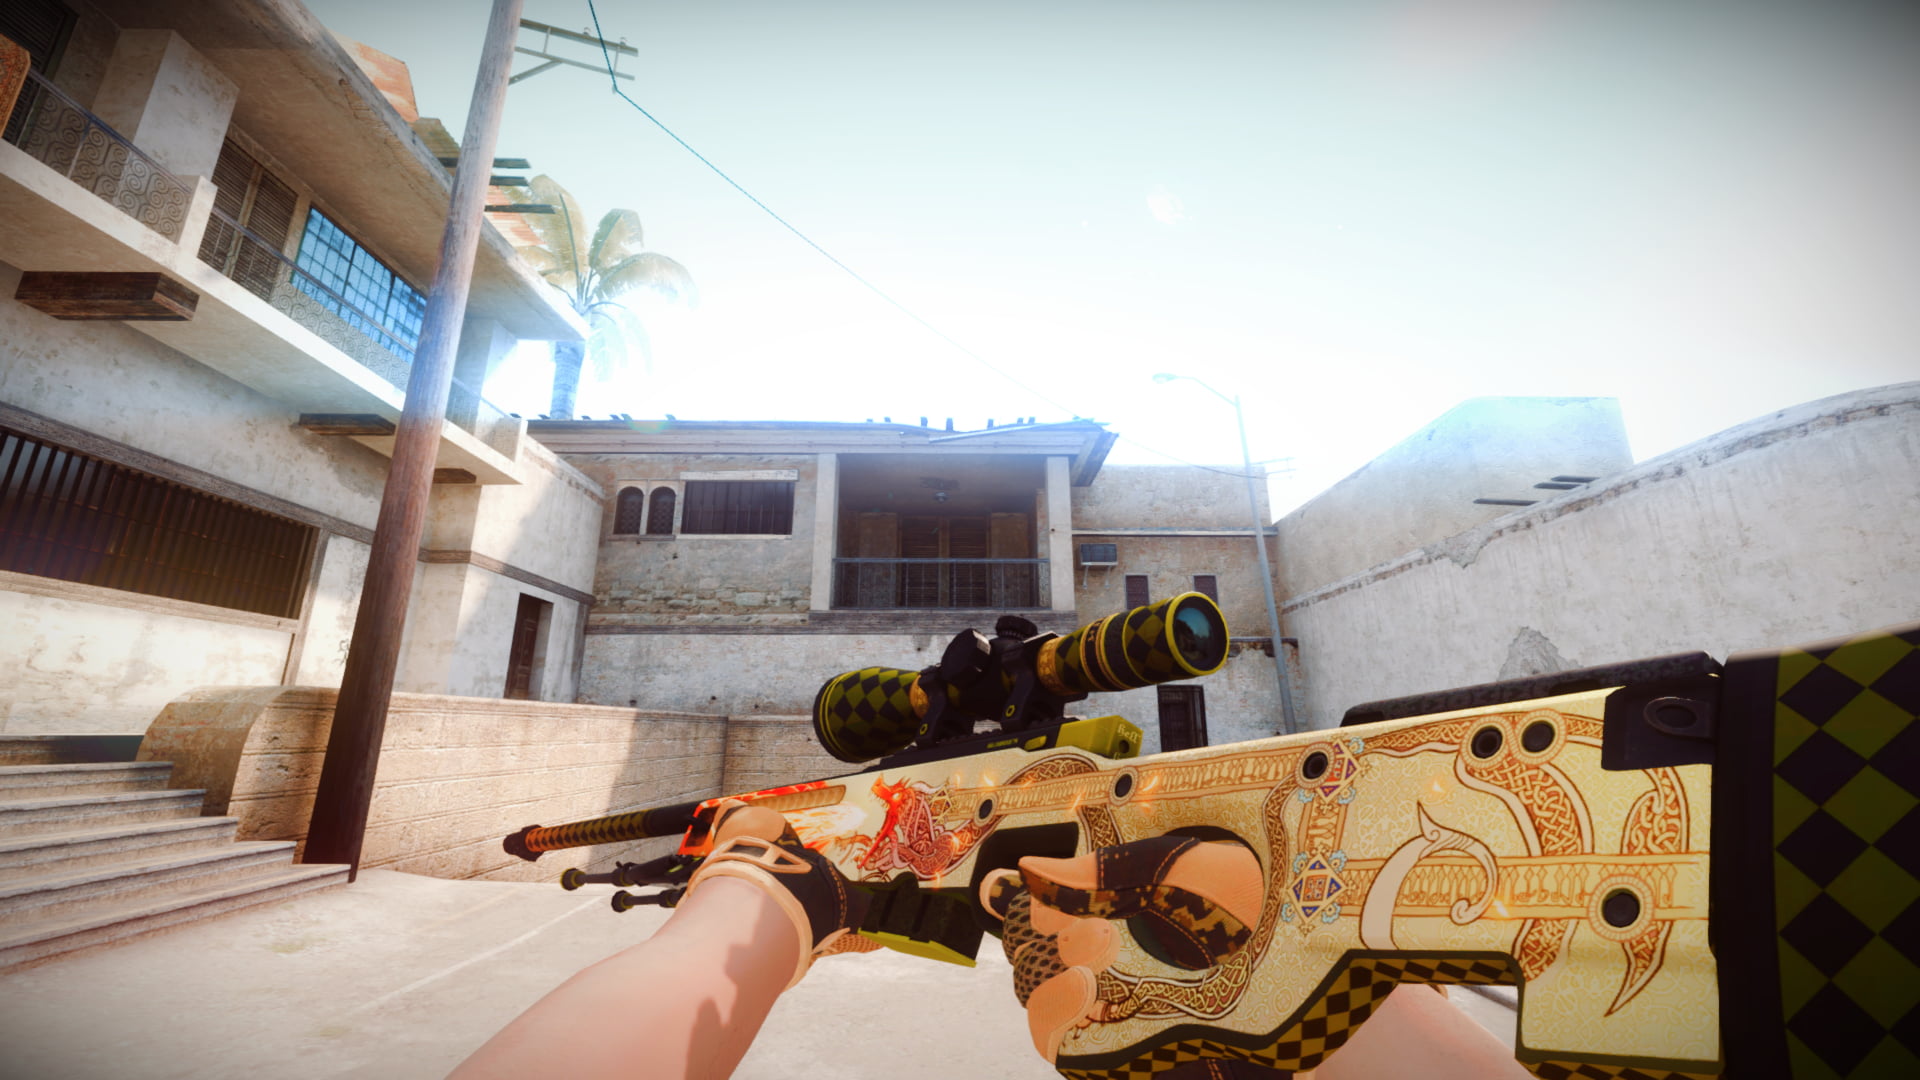 Beige And Brown Sniper Rifle Counter Strike Counter Strike Images, Photos, Reviews